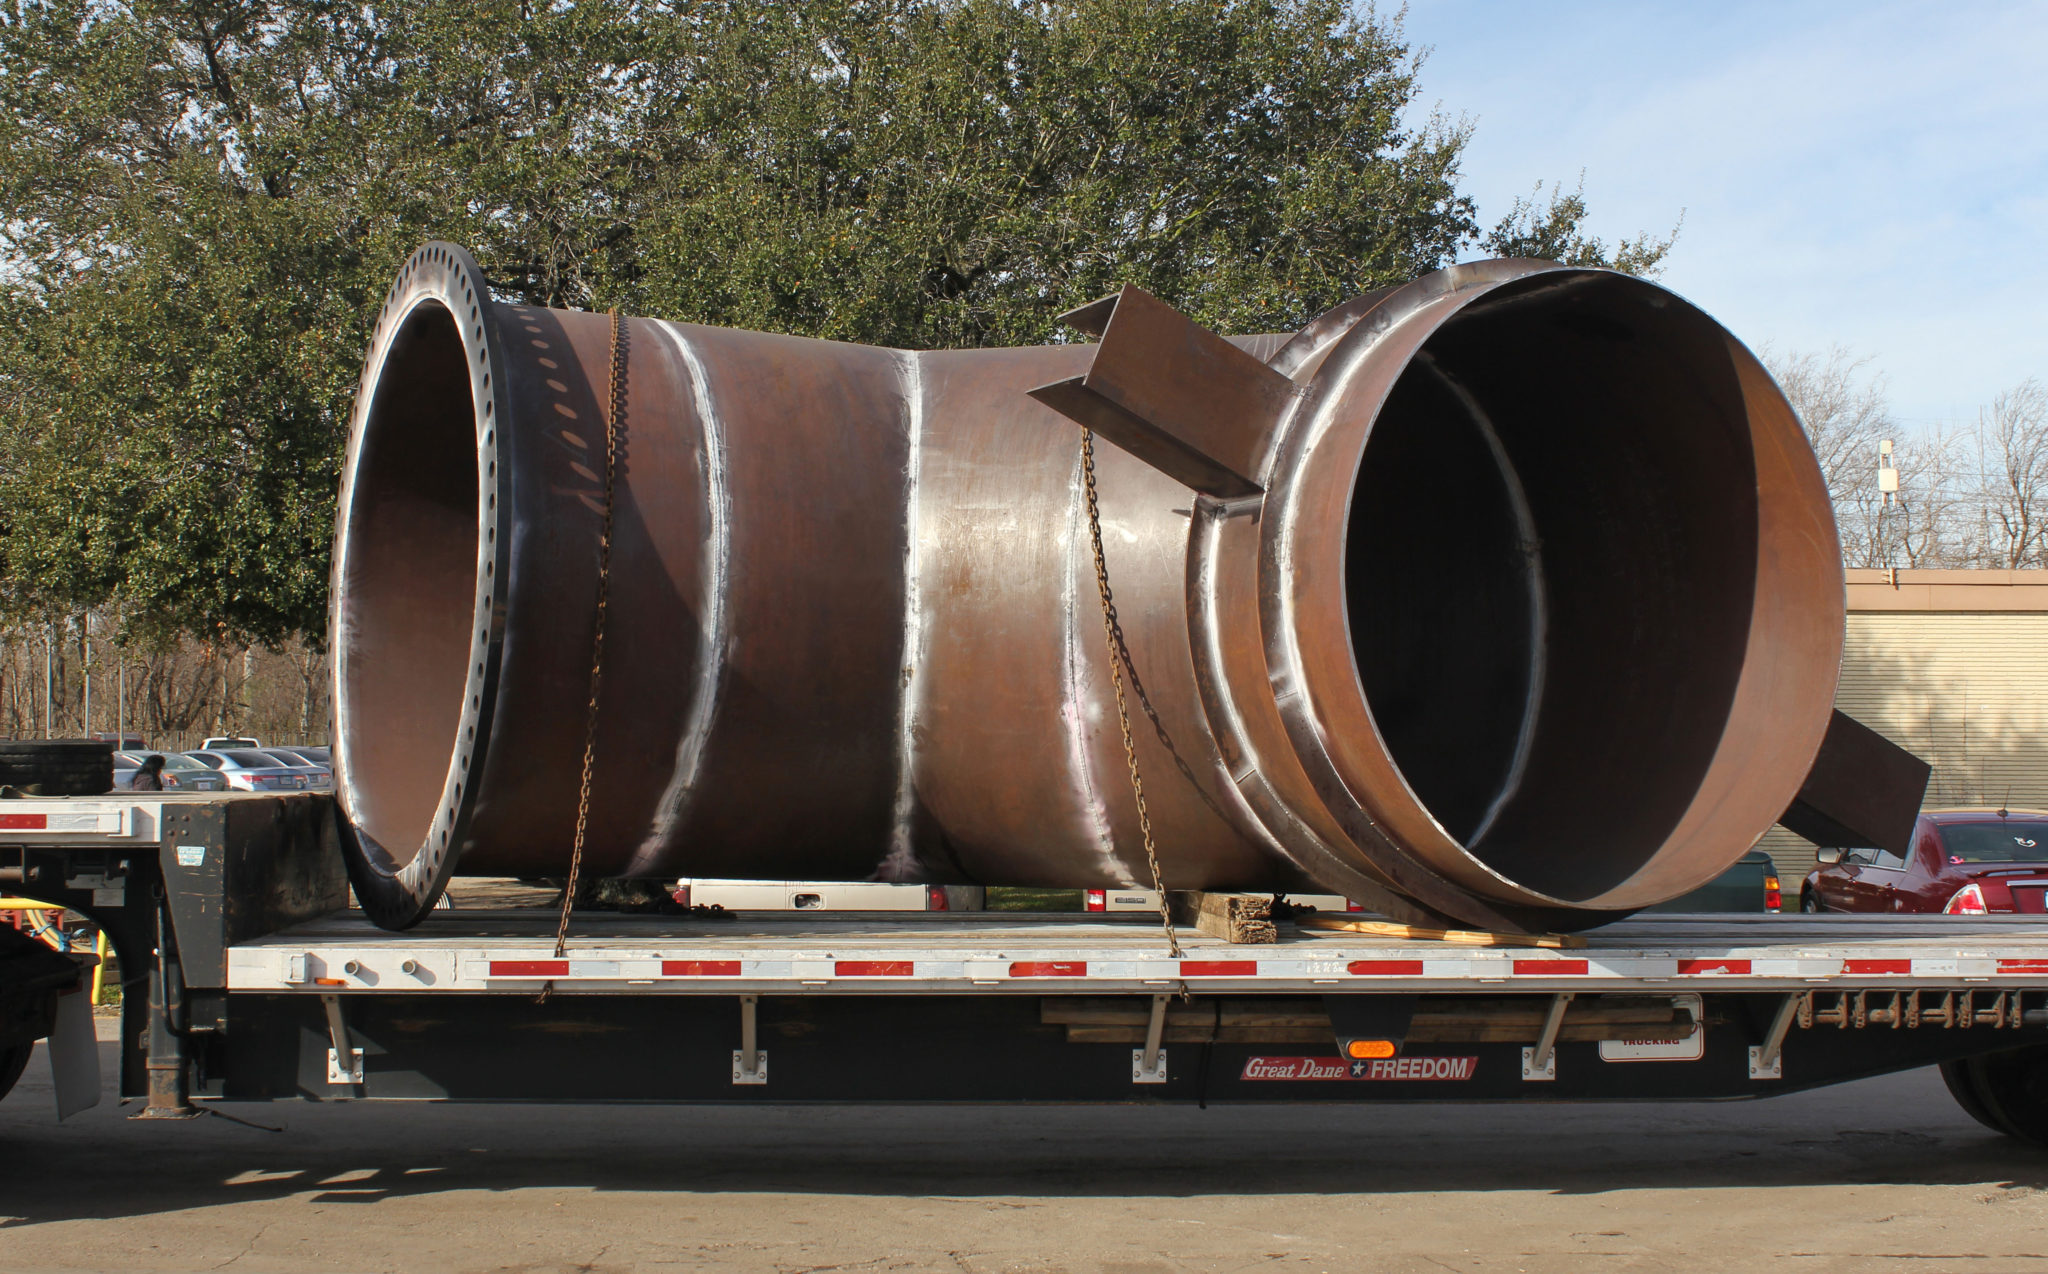 90" Dia. Duct Work Designed for an Ammonia Plant in Louisiana